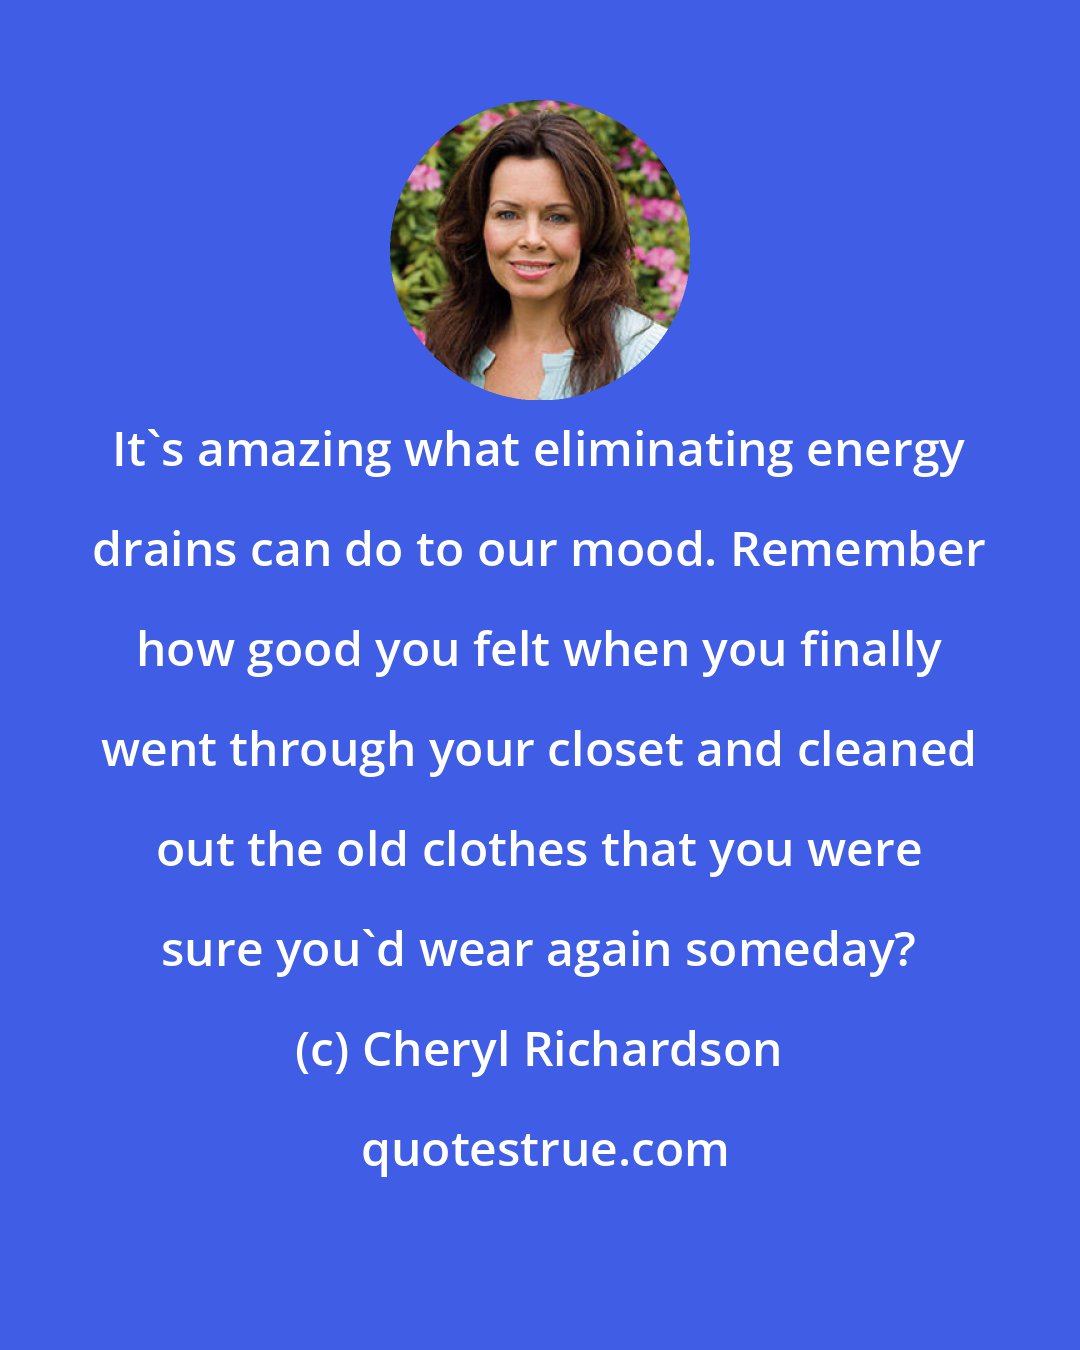 Cheryl Richardson: It's amazing what eliminating energy drains can do to our mood. Remember how good you felt when you finally went through your closet and cleaned out the old clothes that you were sure you'd wear again someday?